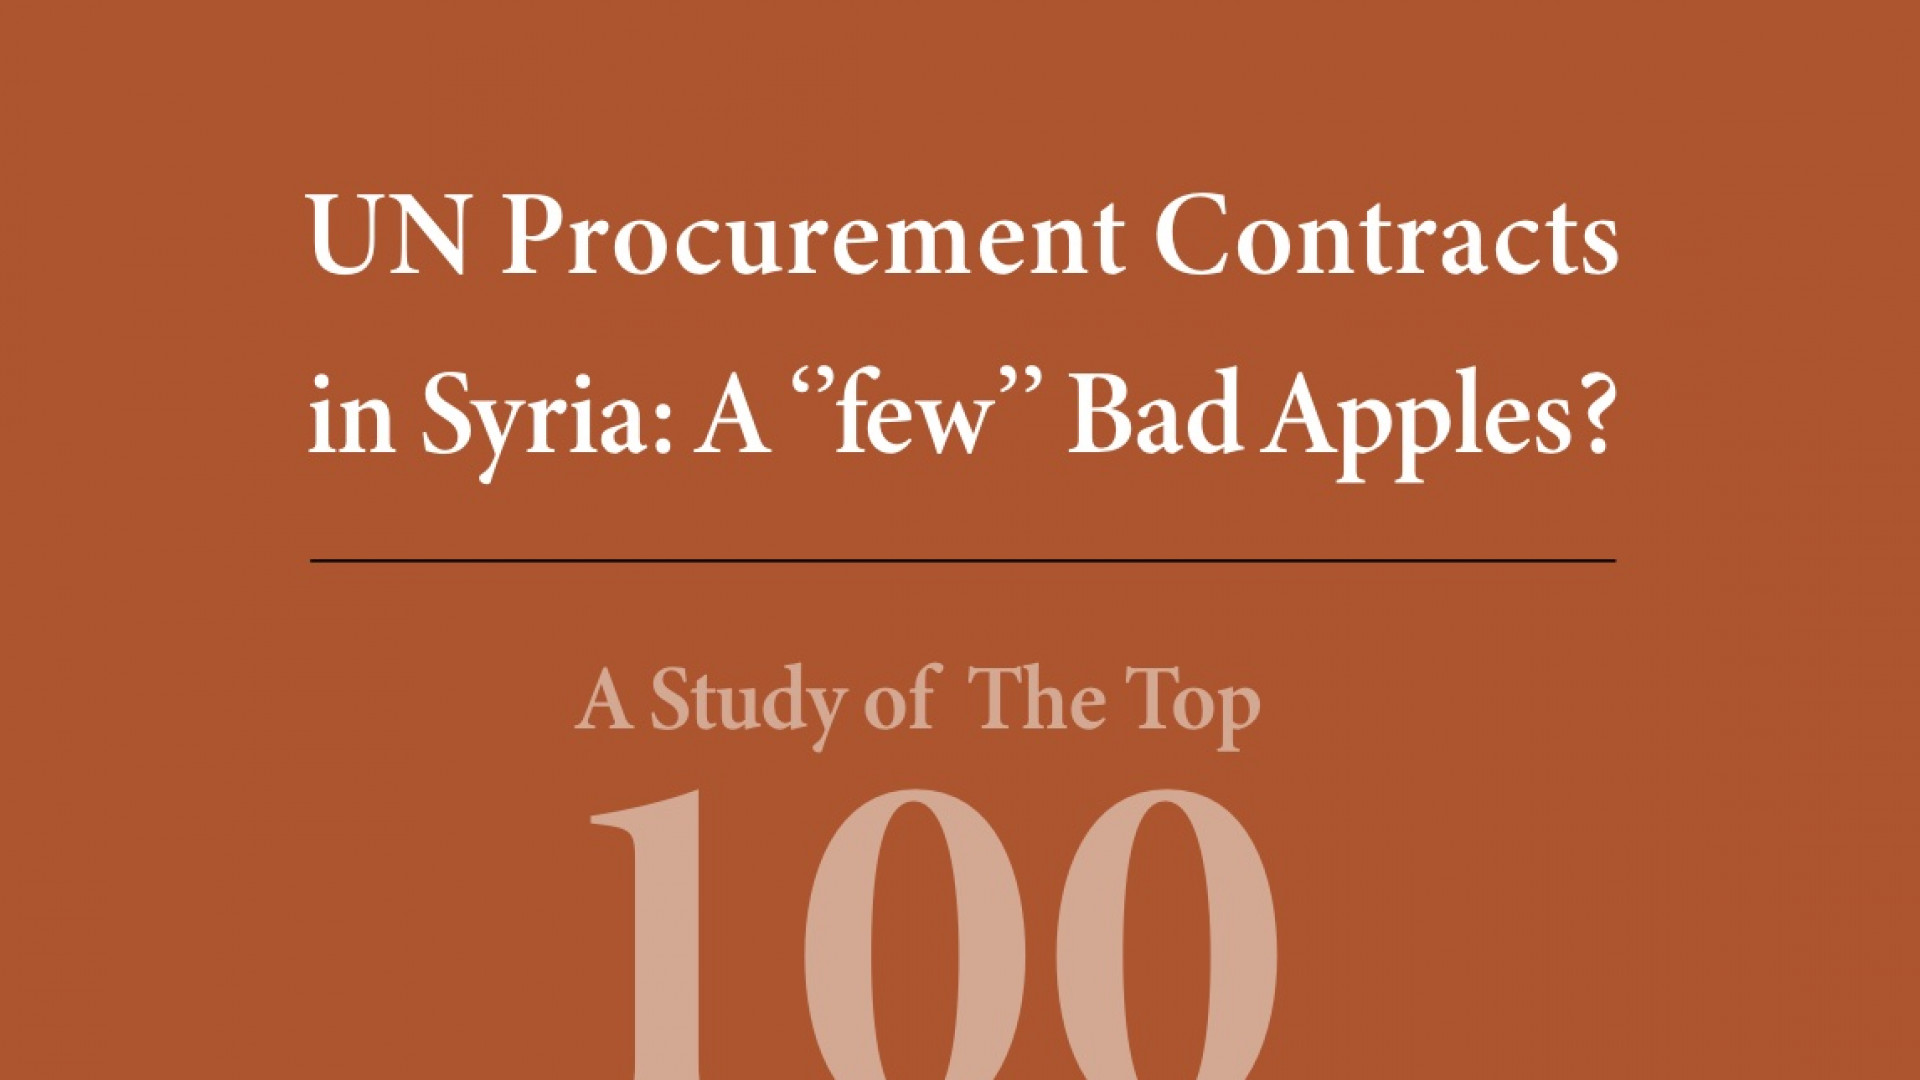 UN Procurement Contracts In Syria: A Few Bad Apples